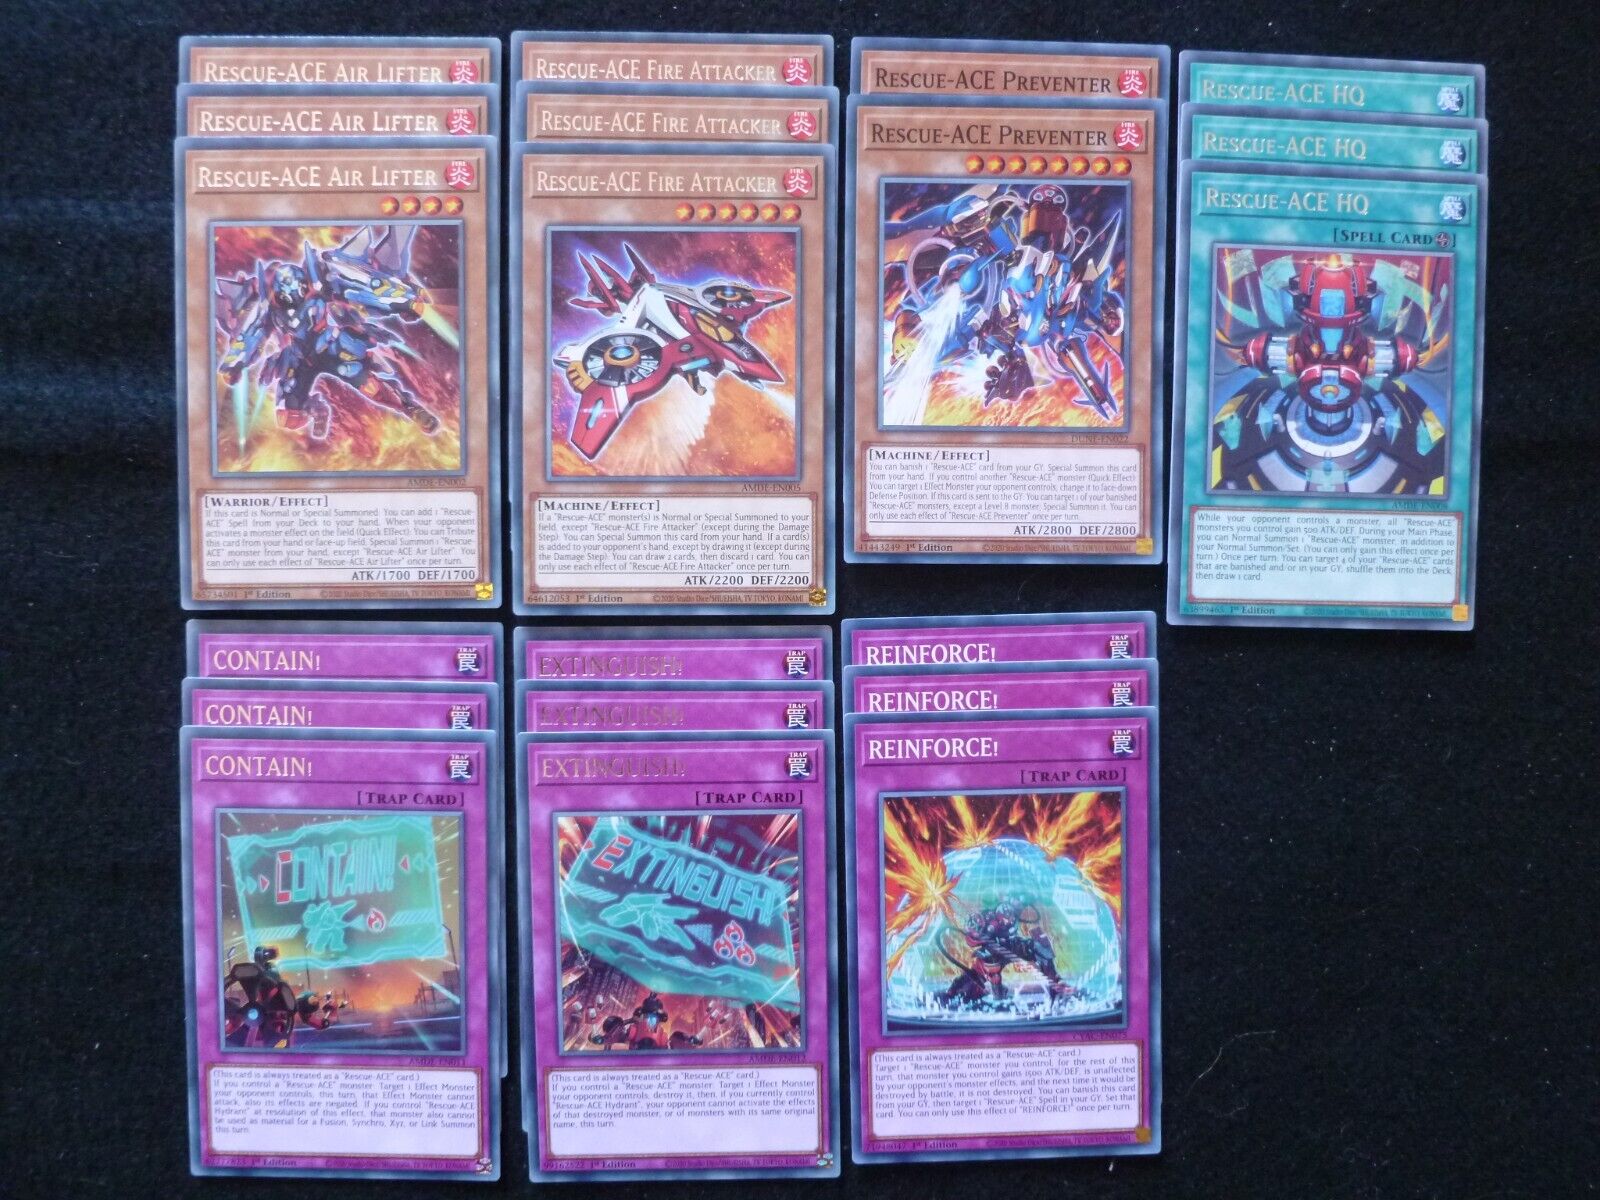 YU-GI-OH 20 CARD RESCUE-ACE DECK CORE 1ST EDITION